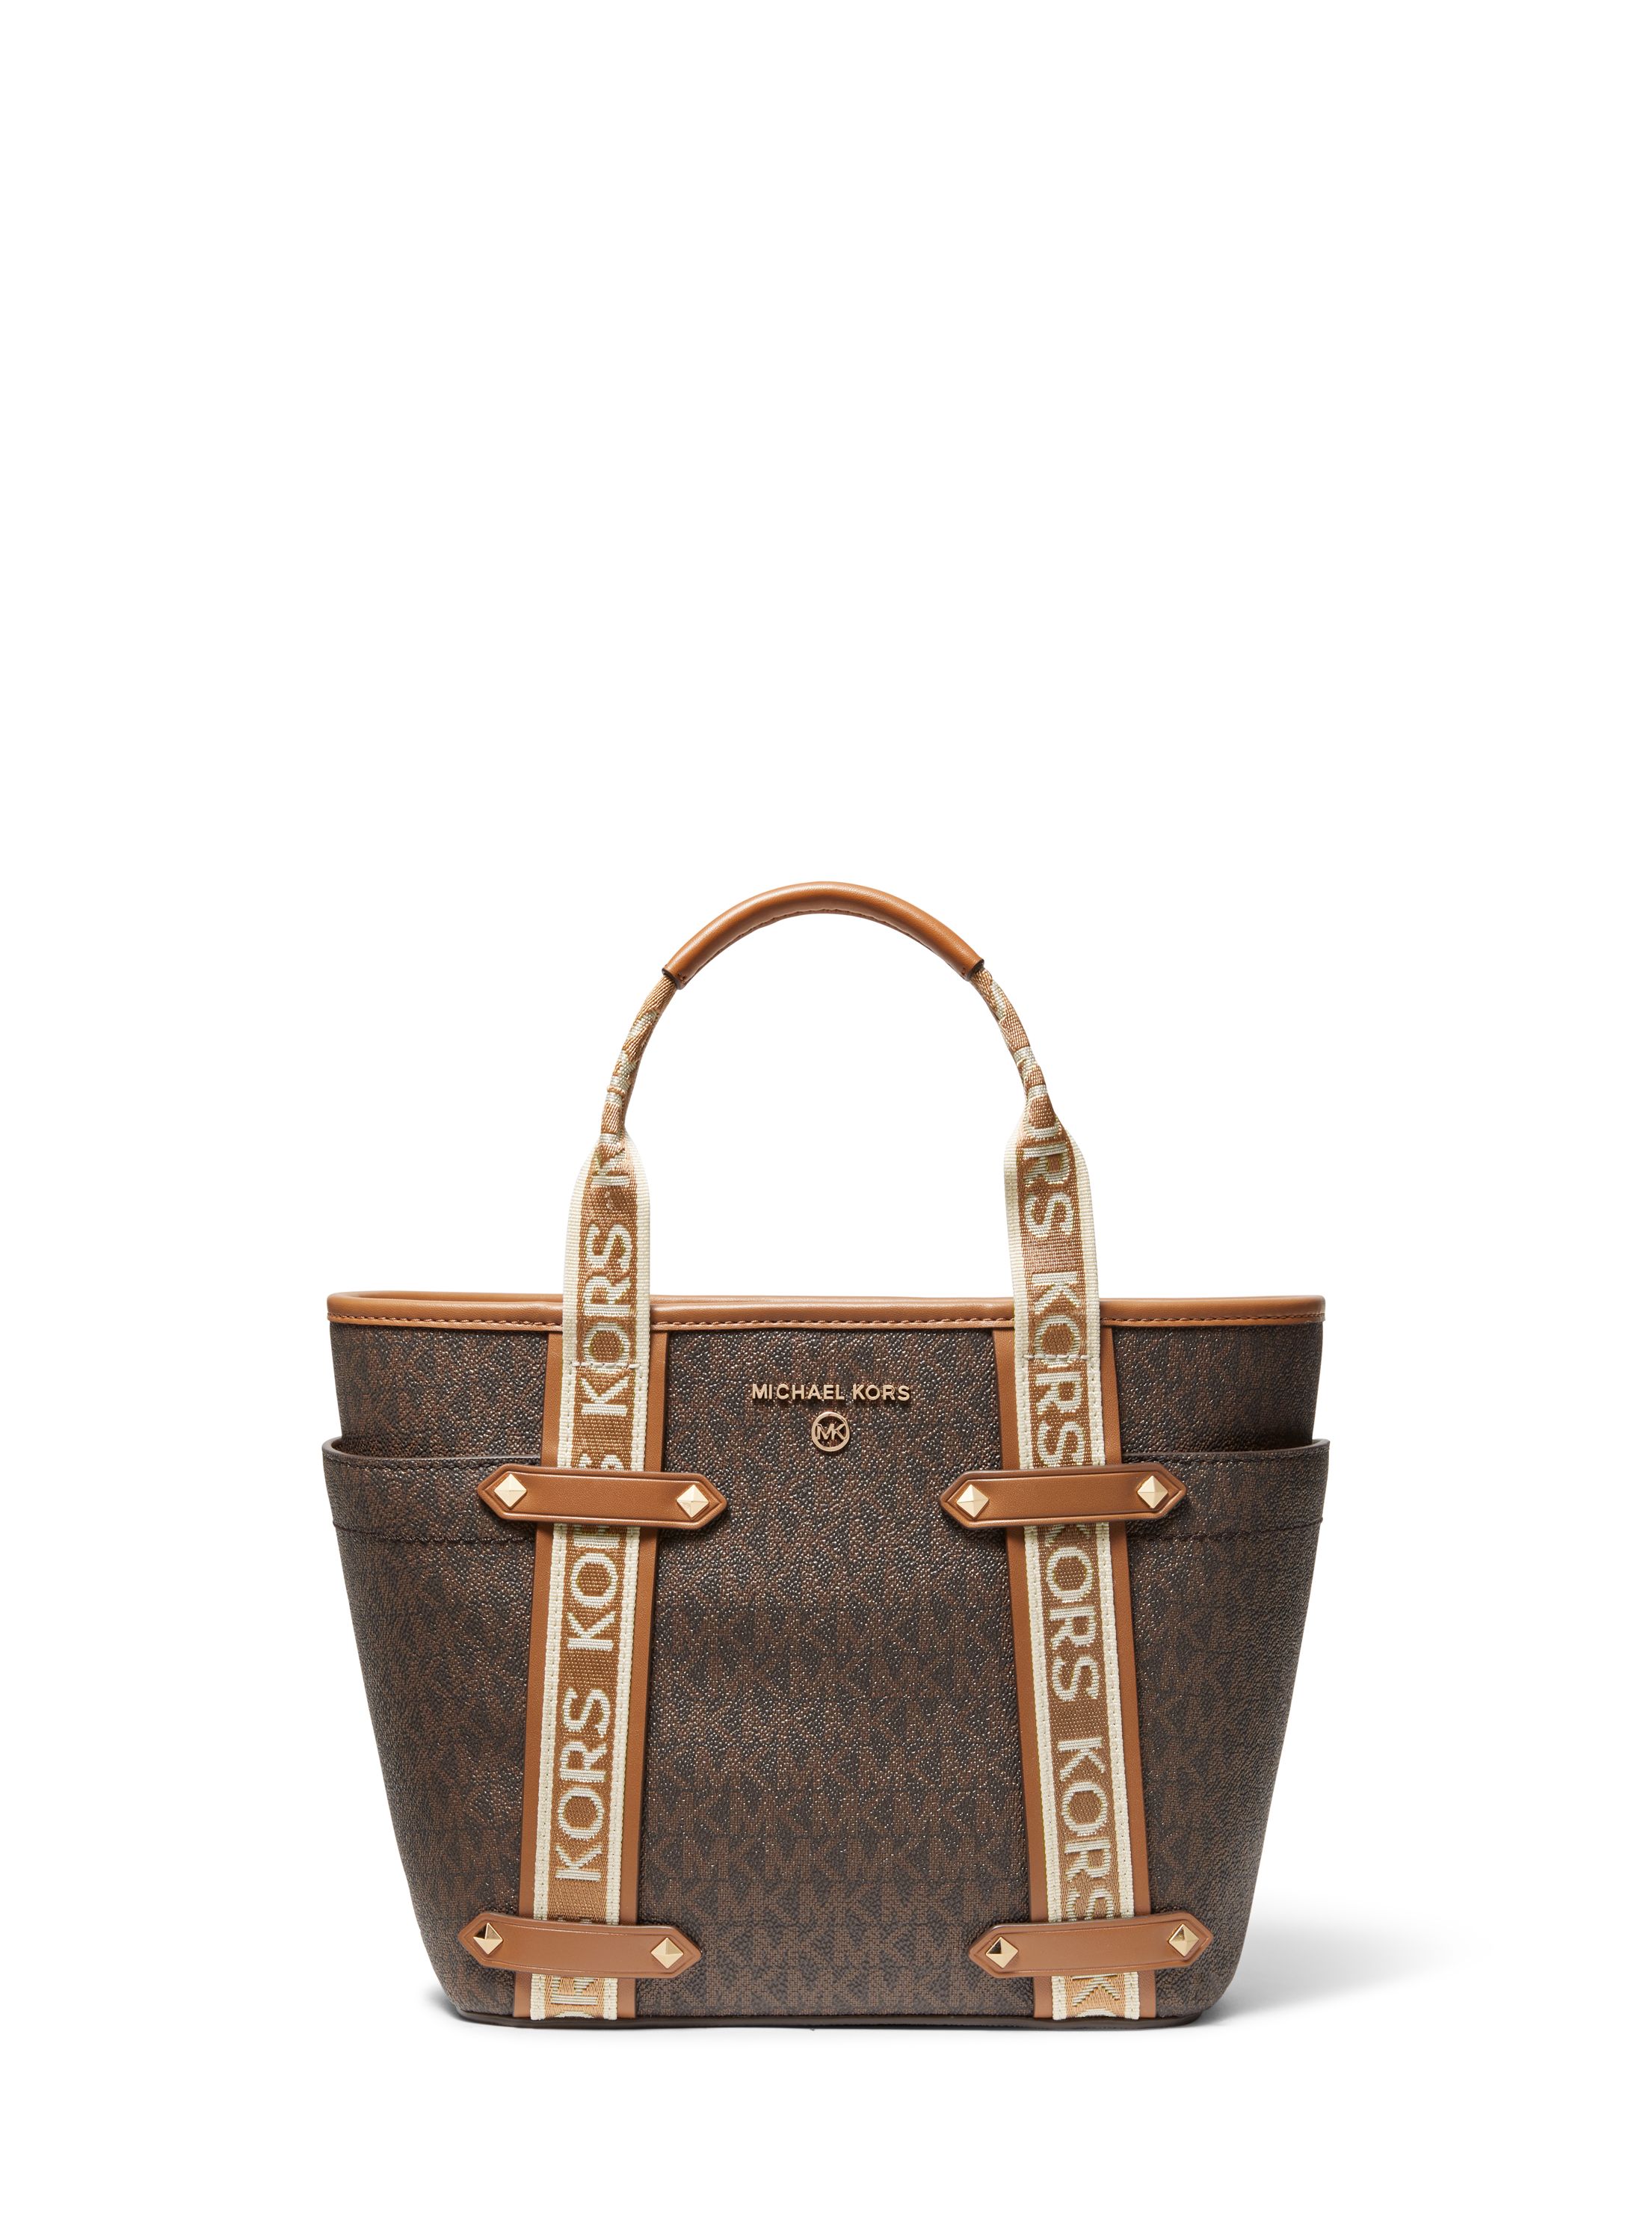 Michael Kors Maeve Small Convertible Open Tote